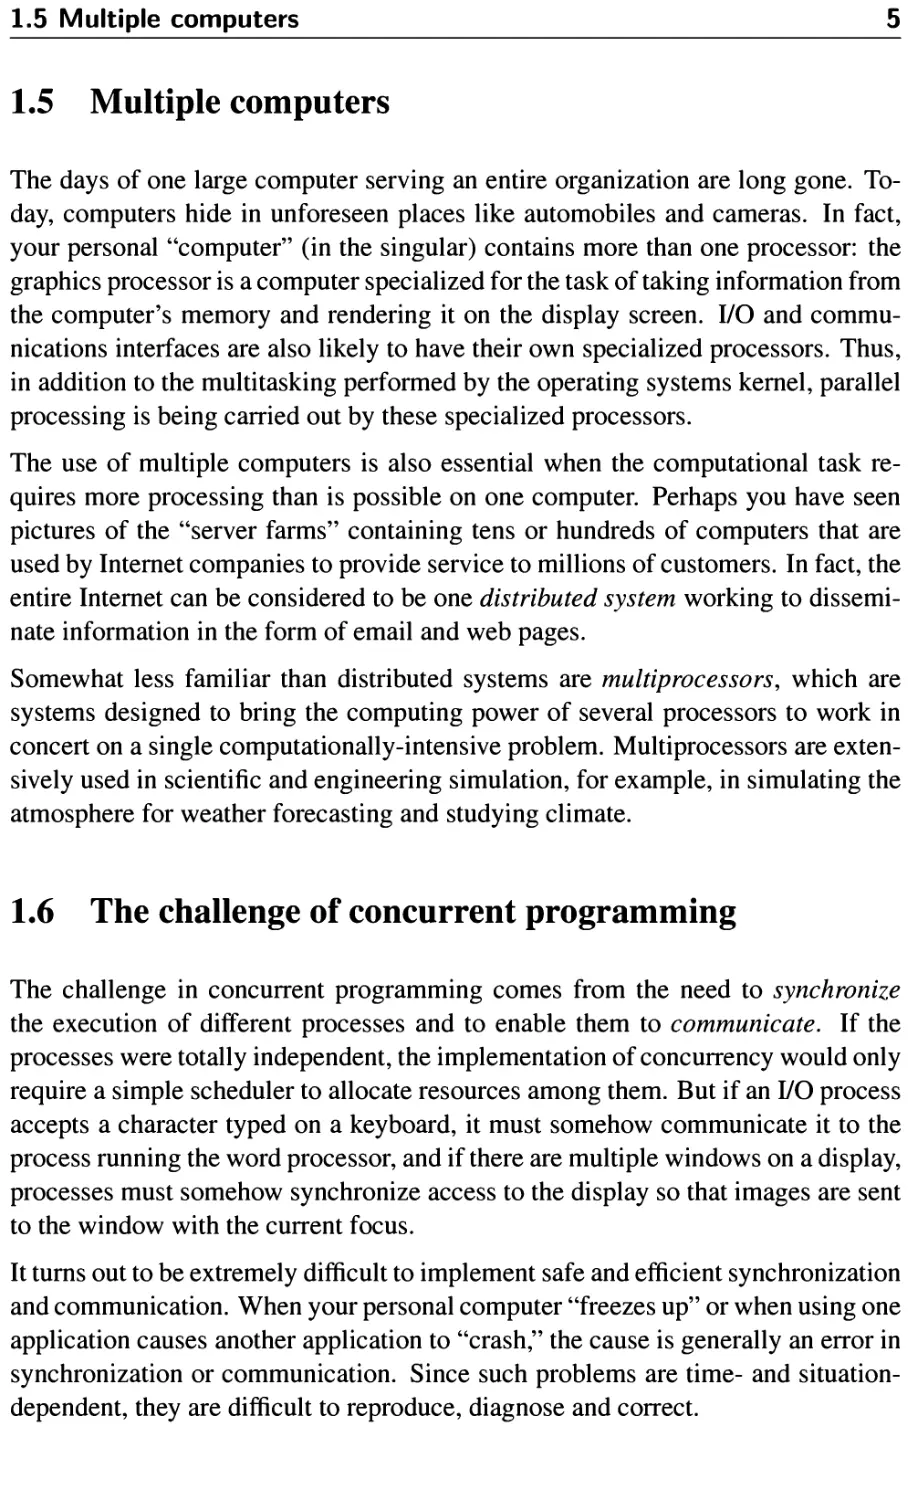 1.5 Multiple computers
1.6 The challenge of concurrent programming